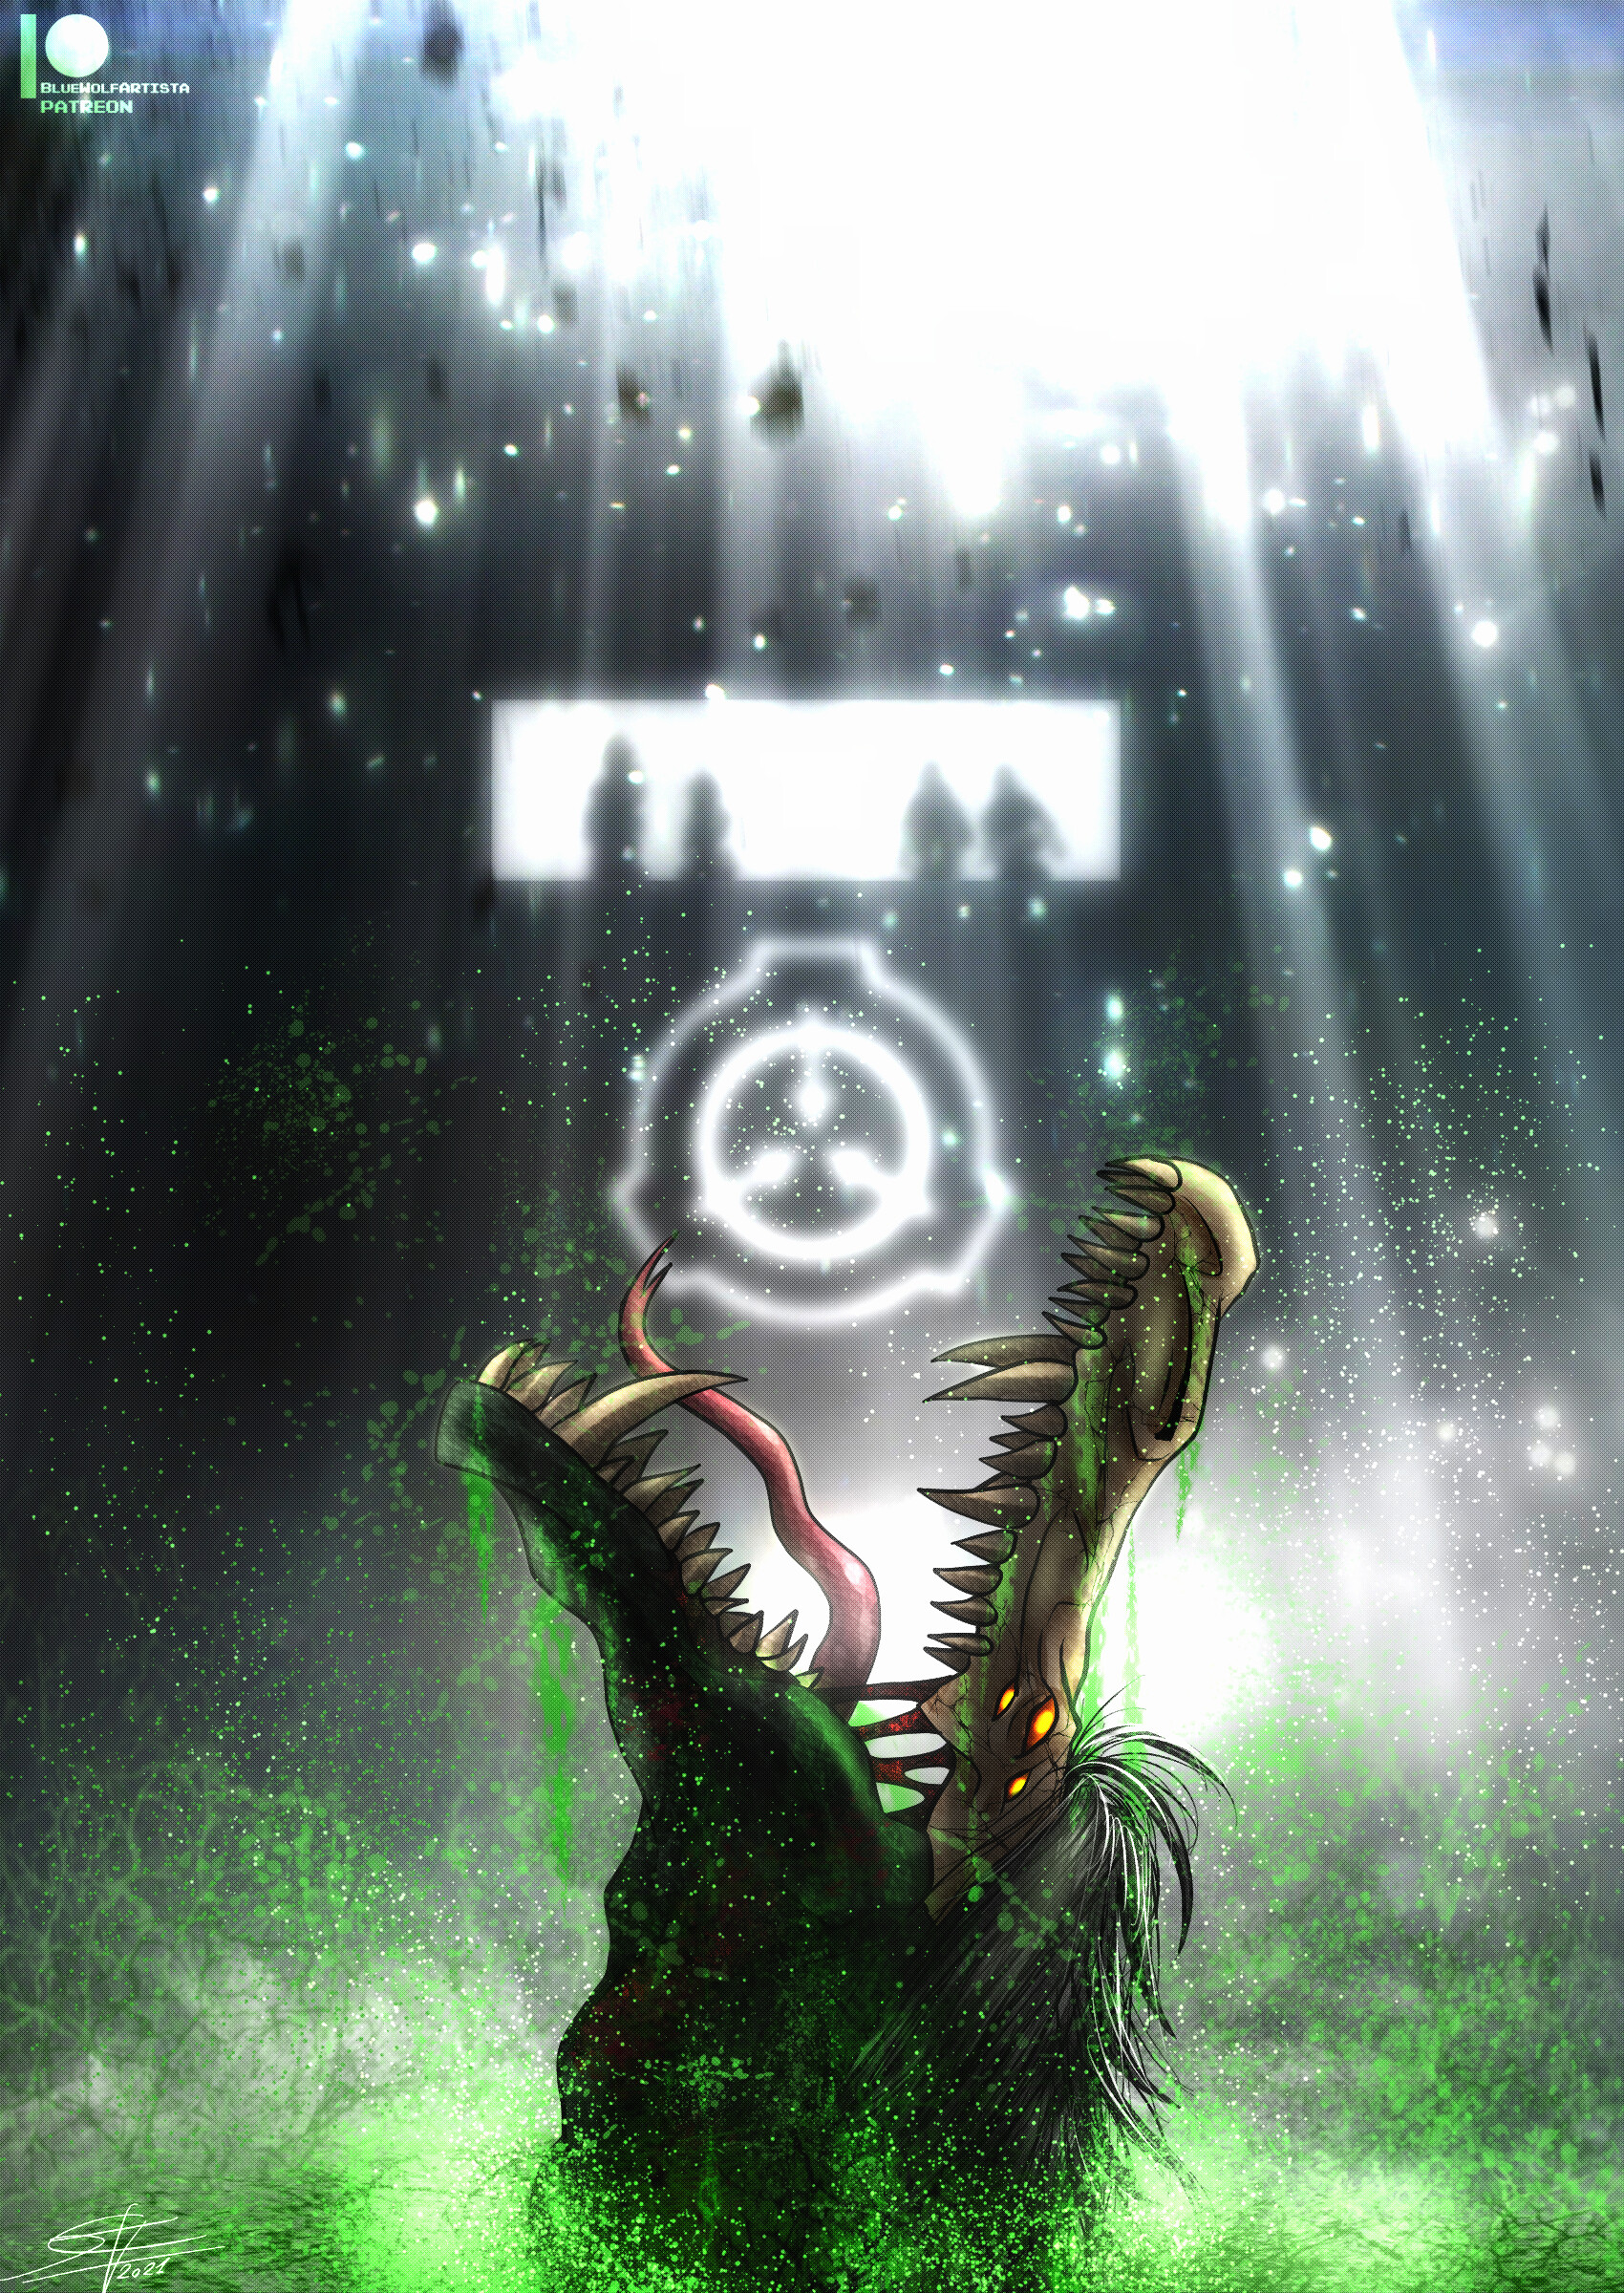 SCP 682 Hard To Destroy Reptile by ryaquaza1 on DeviantArt